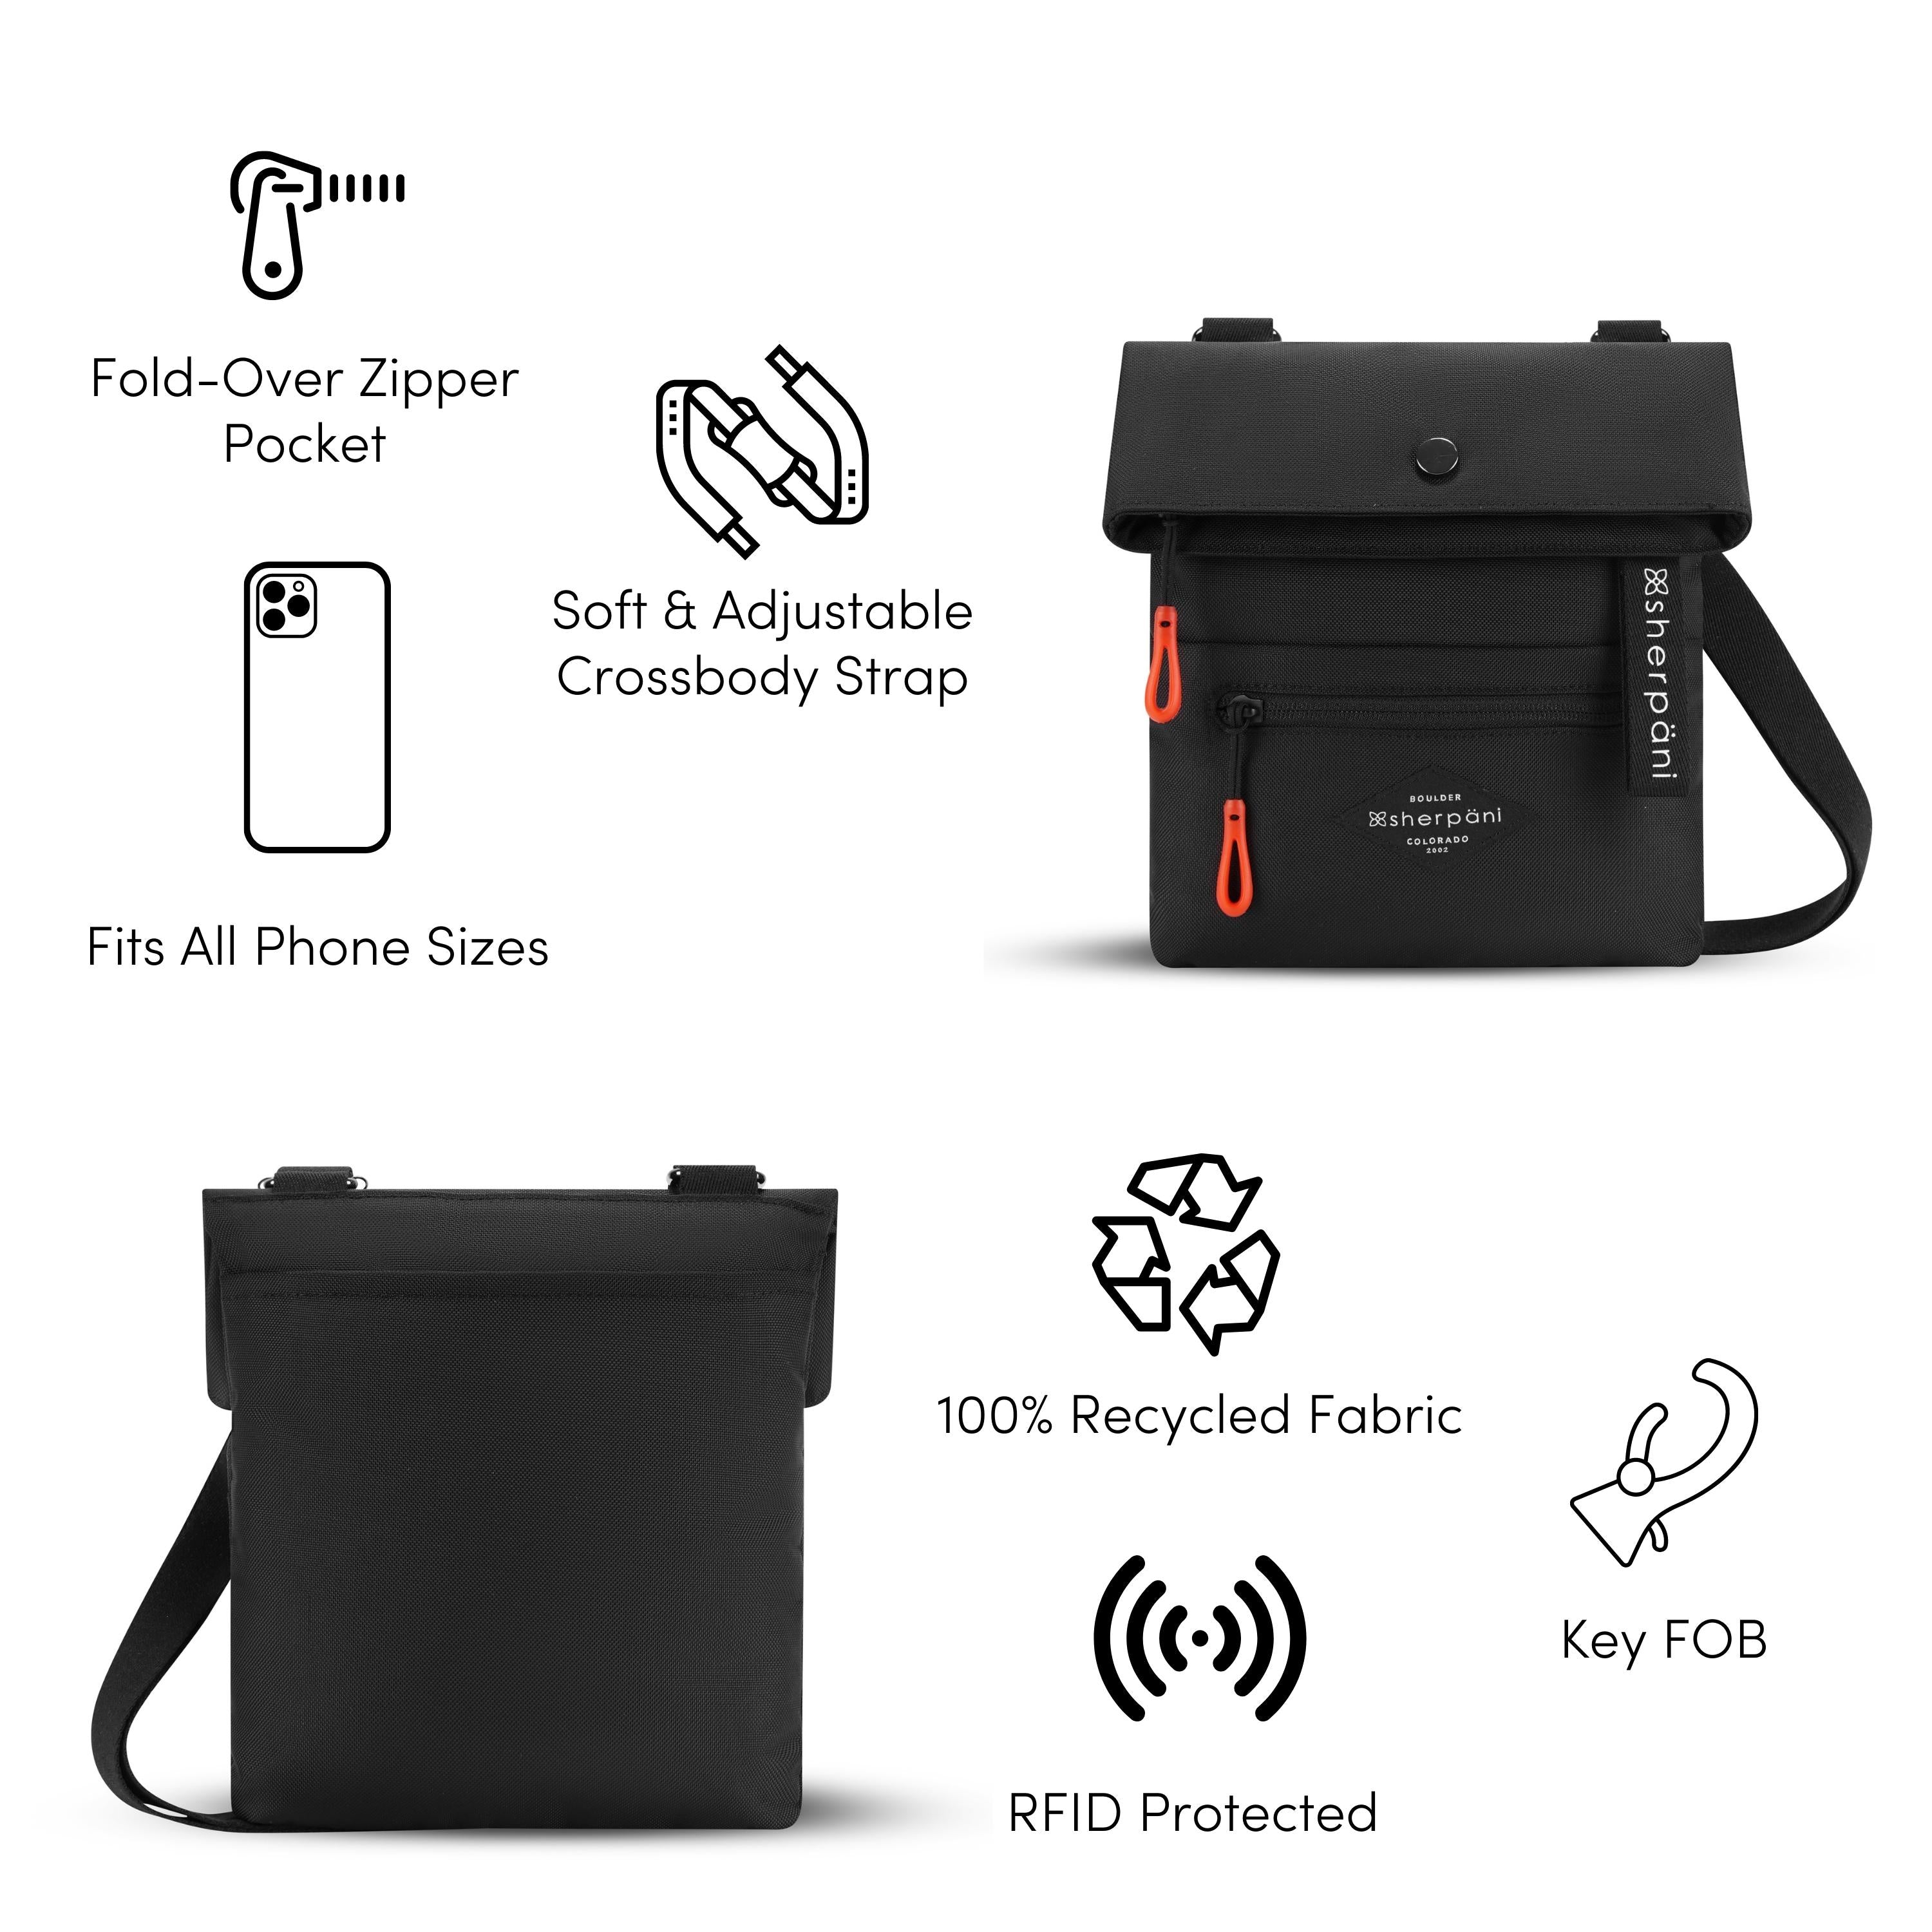 A Graphic showing the features of Sherpani’s crossbody, the Pica. There is a front and back view of the bag. The following features are highlighted with corresponding graphics: Fold-Over Zipper Pocket, Soft &amp; Adjustable Crossbody Strap, Fits All Phone Sizes, 100% Recycled Fabric, RFID Protected, Key FOB.